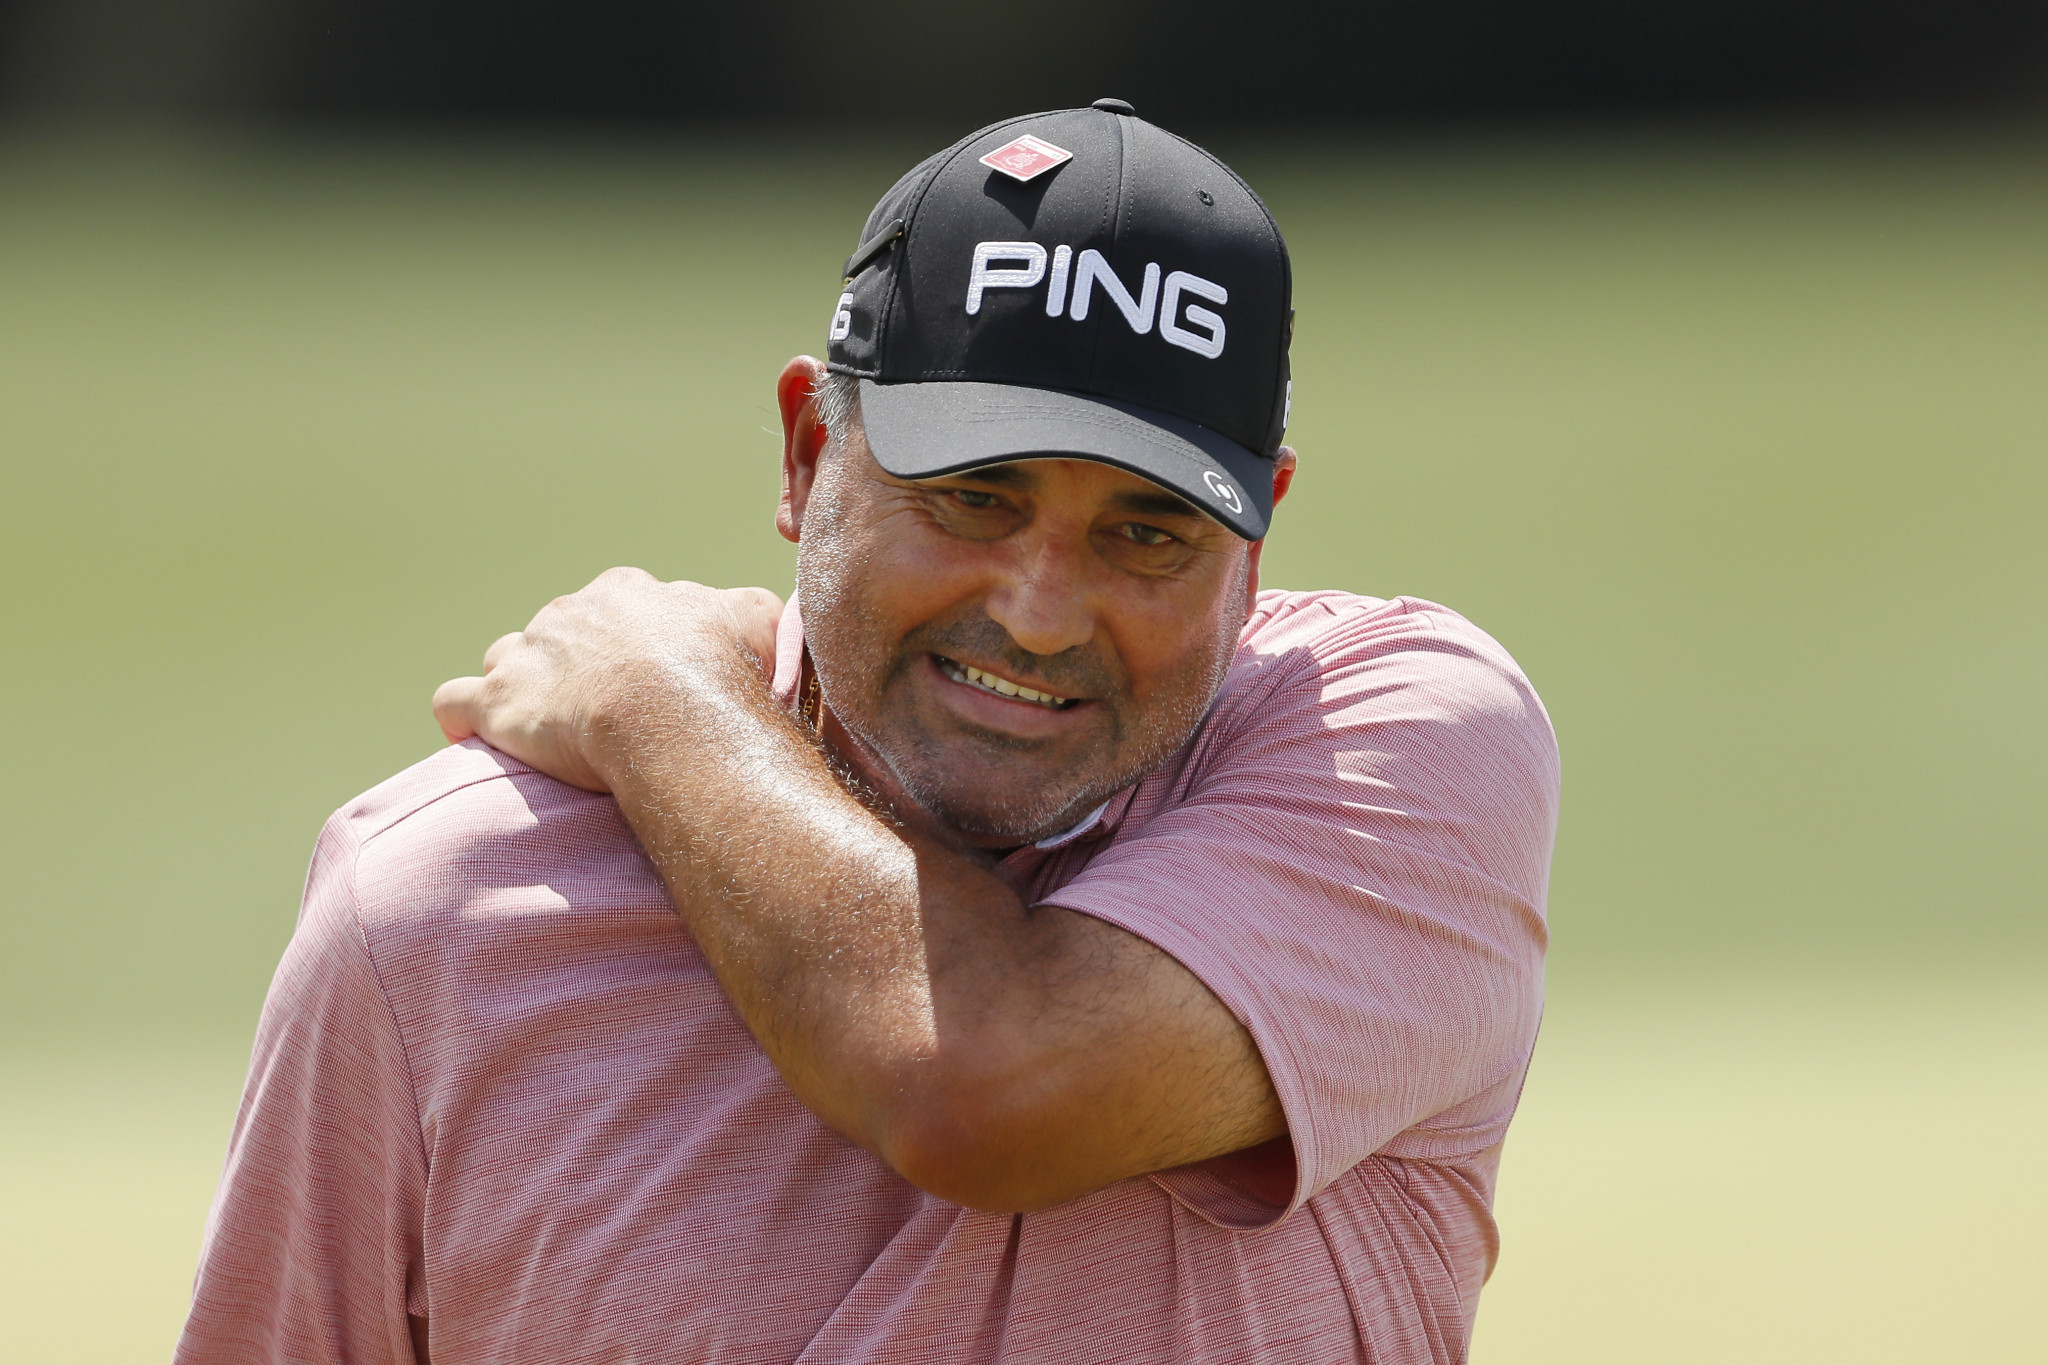 Two-time major winner Cabrera arrested in Brazil amid assault claims